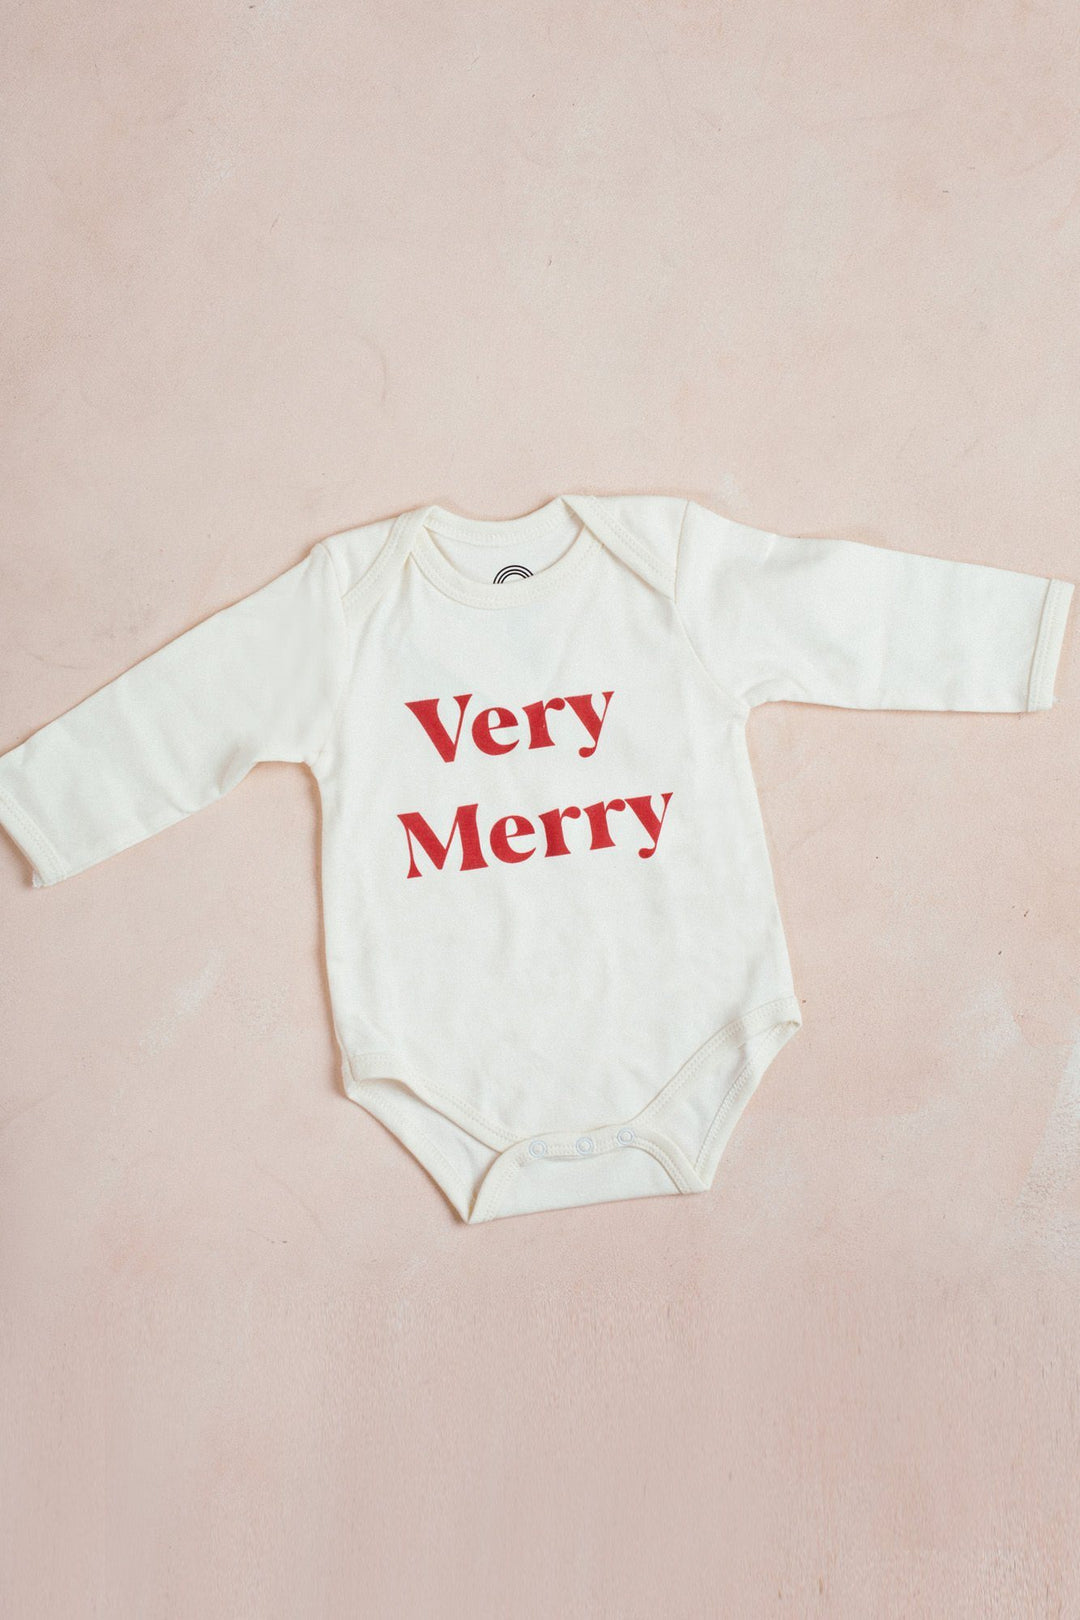 Very Merry Onesie Kids Emerson and Friends 3-6M